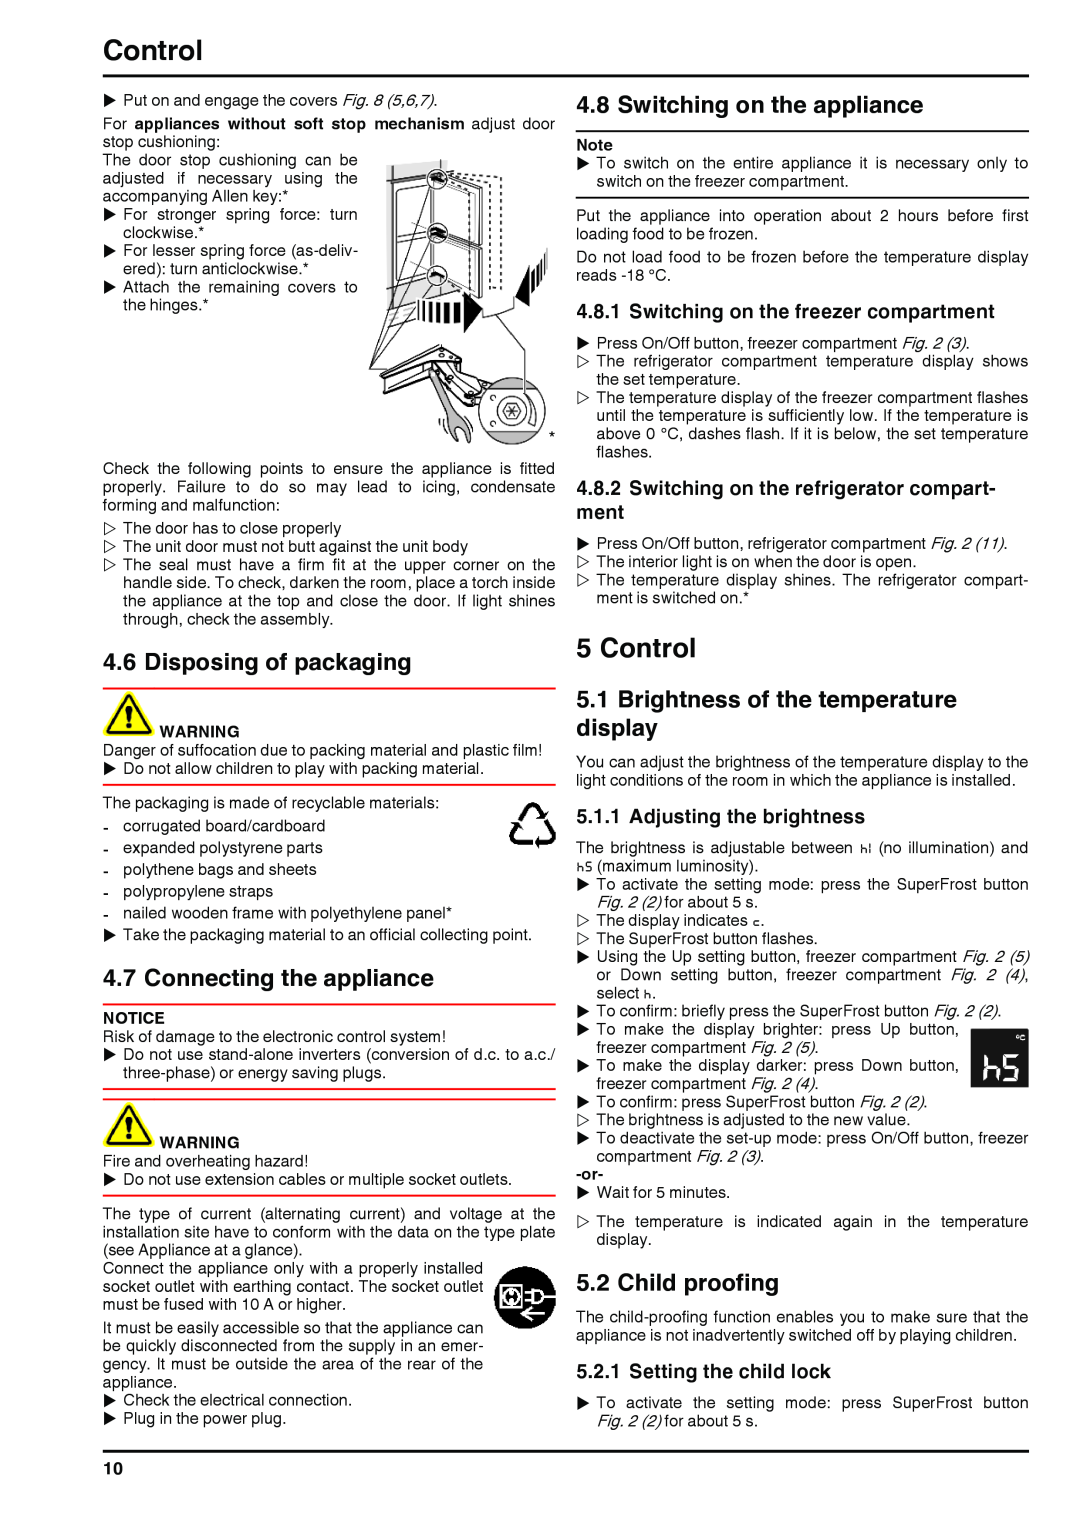 Liebherr 7084284-03 Control, Disposing of packaging, Connecting the appliance, Switching on the appliance, Child proofing 